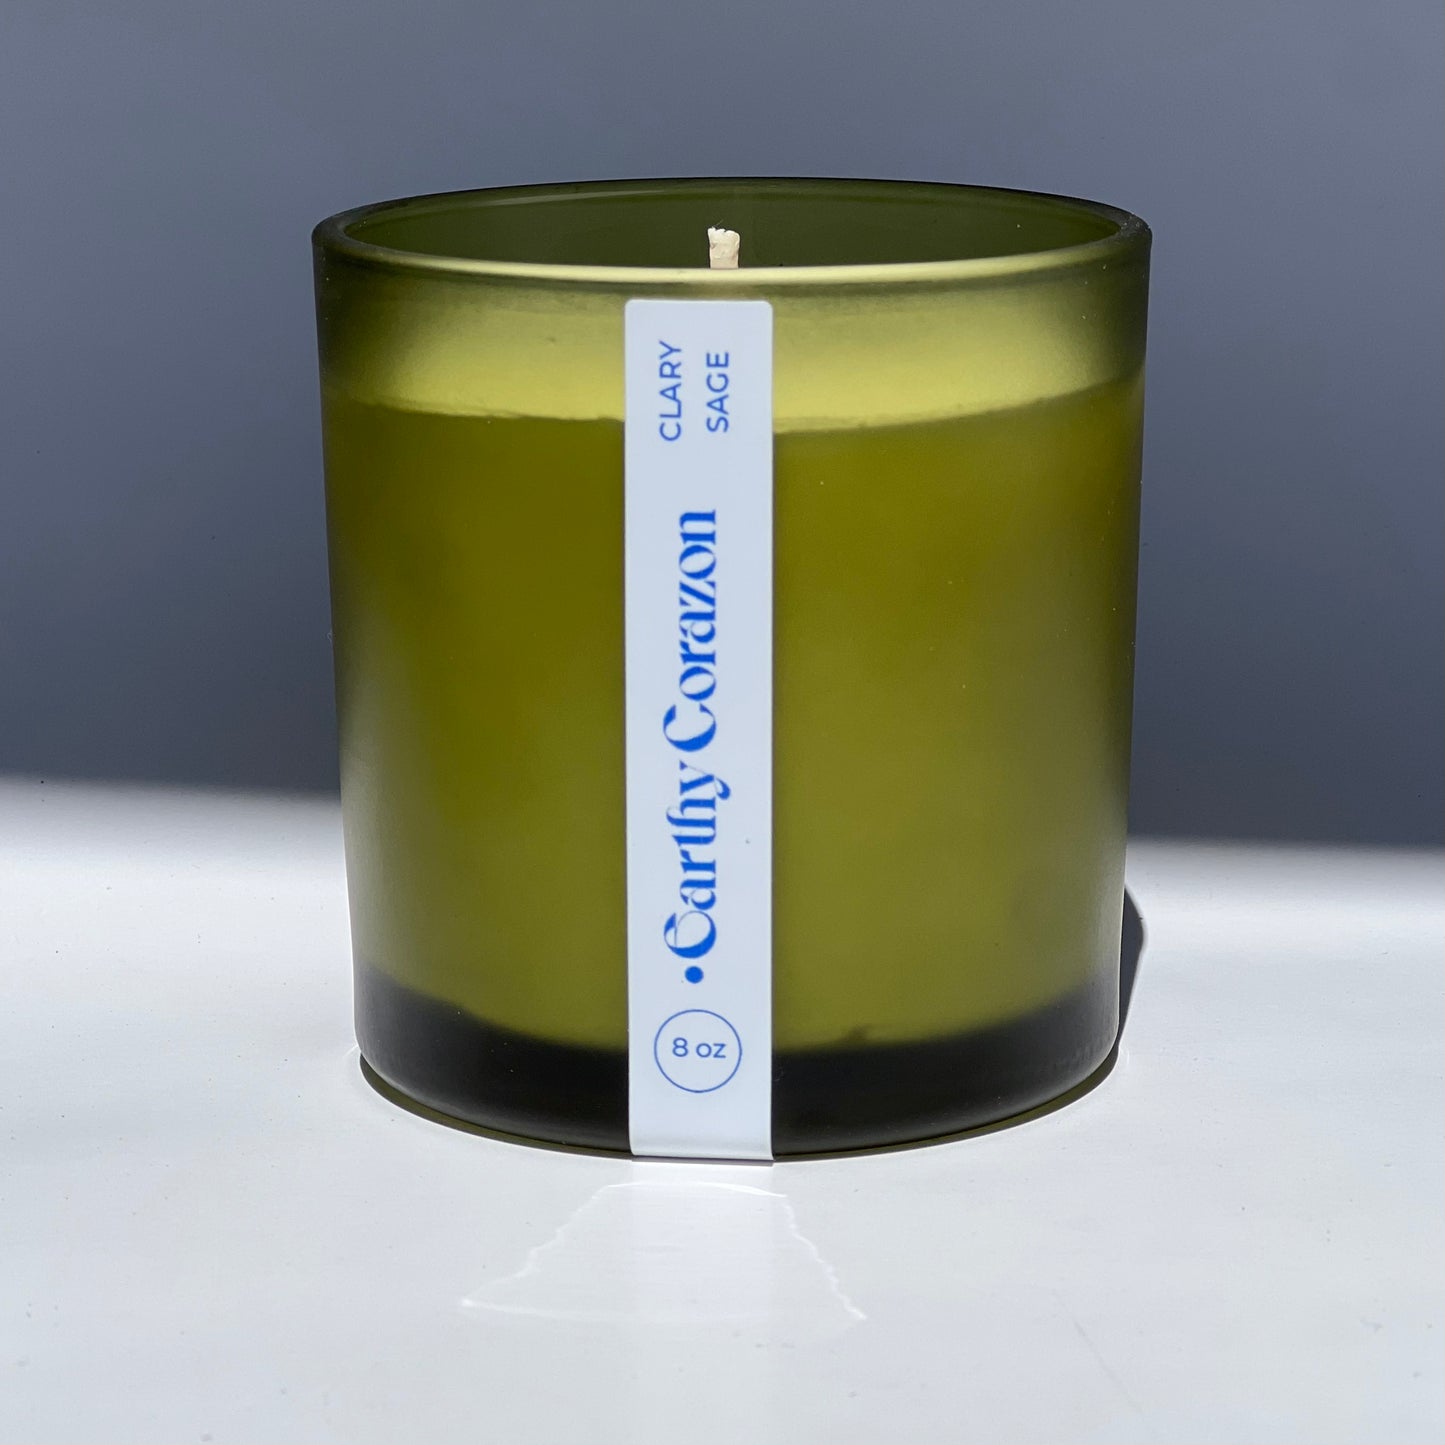 Clary Sage Candle